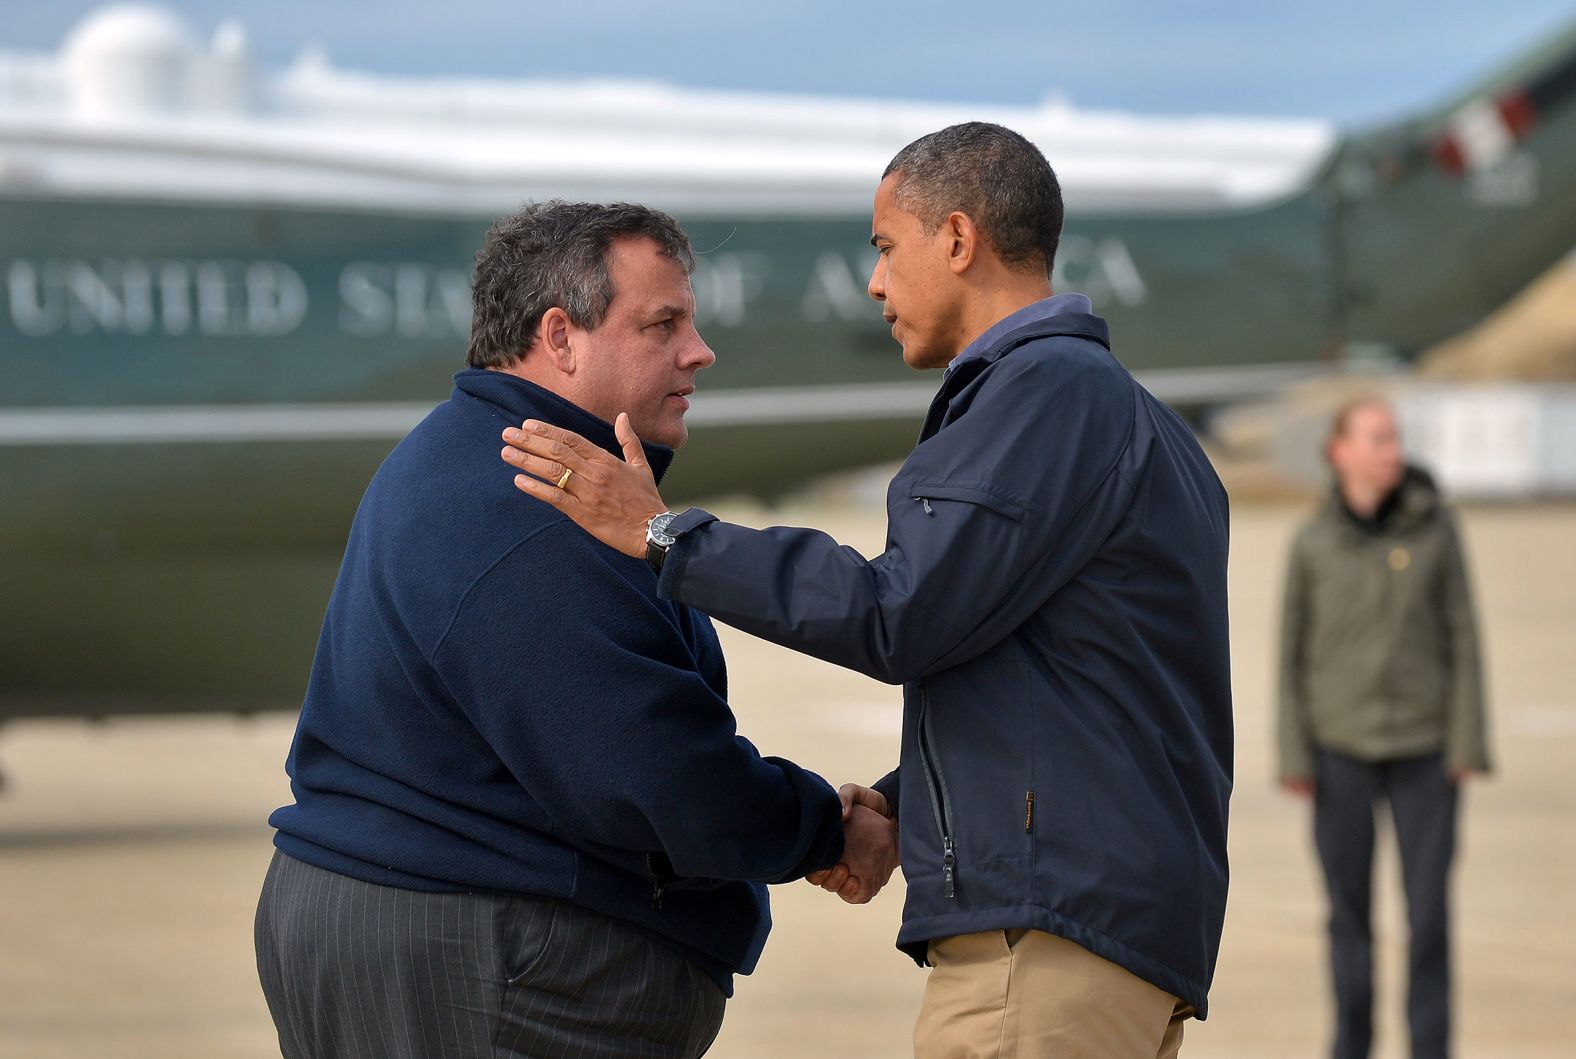 Christie greets President Barack Obama, who arrived in New Jersey to visit areas hit by Hurricane Sandy. The two <a href="index.php?page=&url=http%3A%2F%2Fpoliticalticker.blogs.cnn.com%2F2012%2F10%2F31%2Fobama-takes-in-damage-with-christie-in-new-jersey%2F" target="_blank">toured devastated beach towns</a> together. "I think the people of New Jersey recognize that (Christie) has put his heart and soul into making sure that the people of New Jersey bounce back even stronger than before. I want to thank him for his extraordinary leadership and partnership," Obama said.